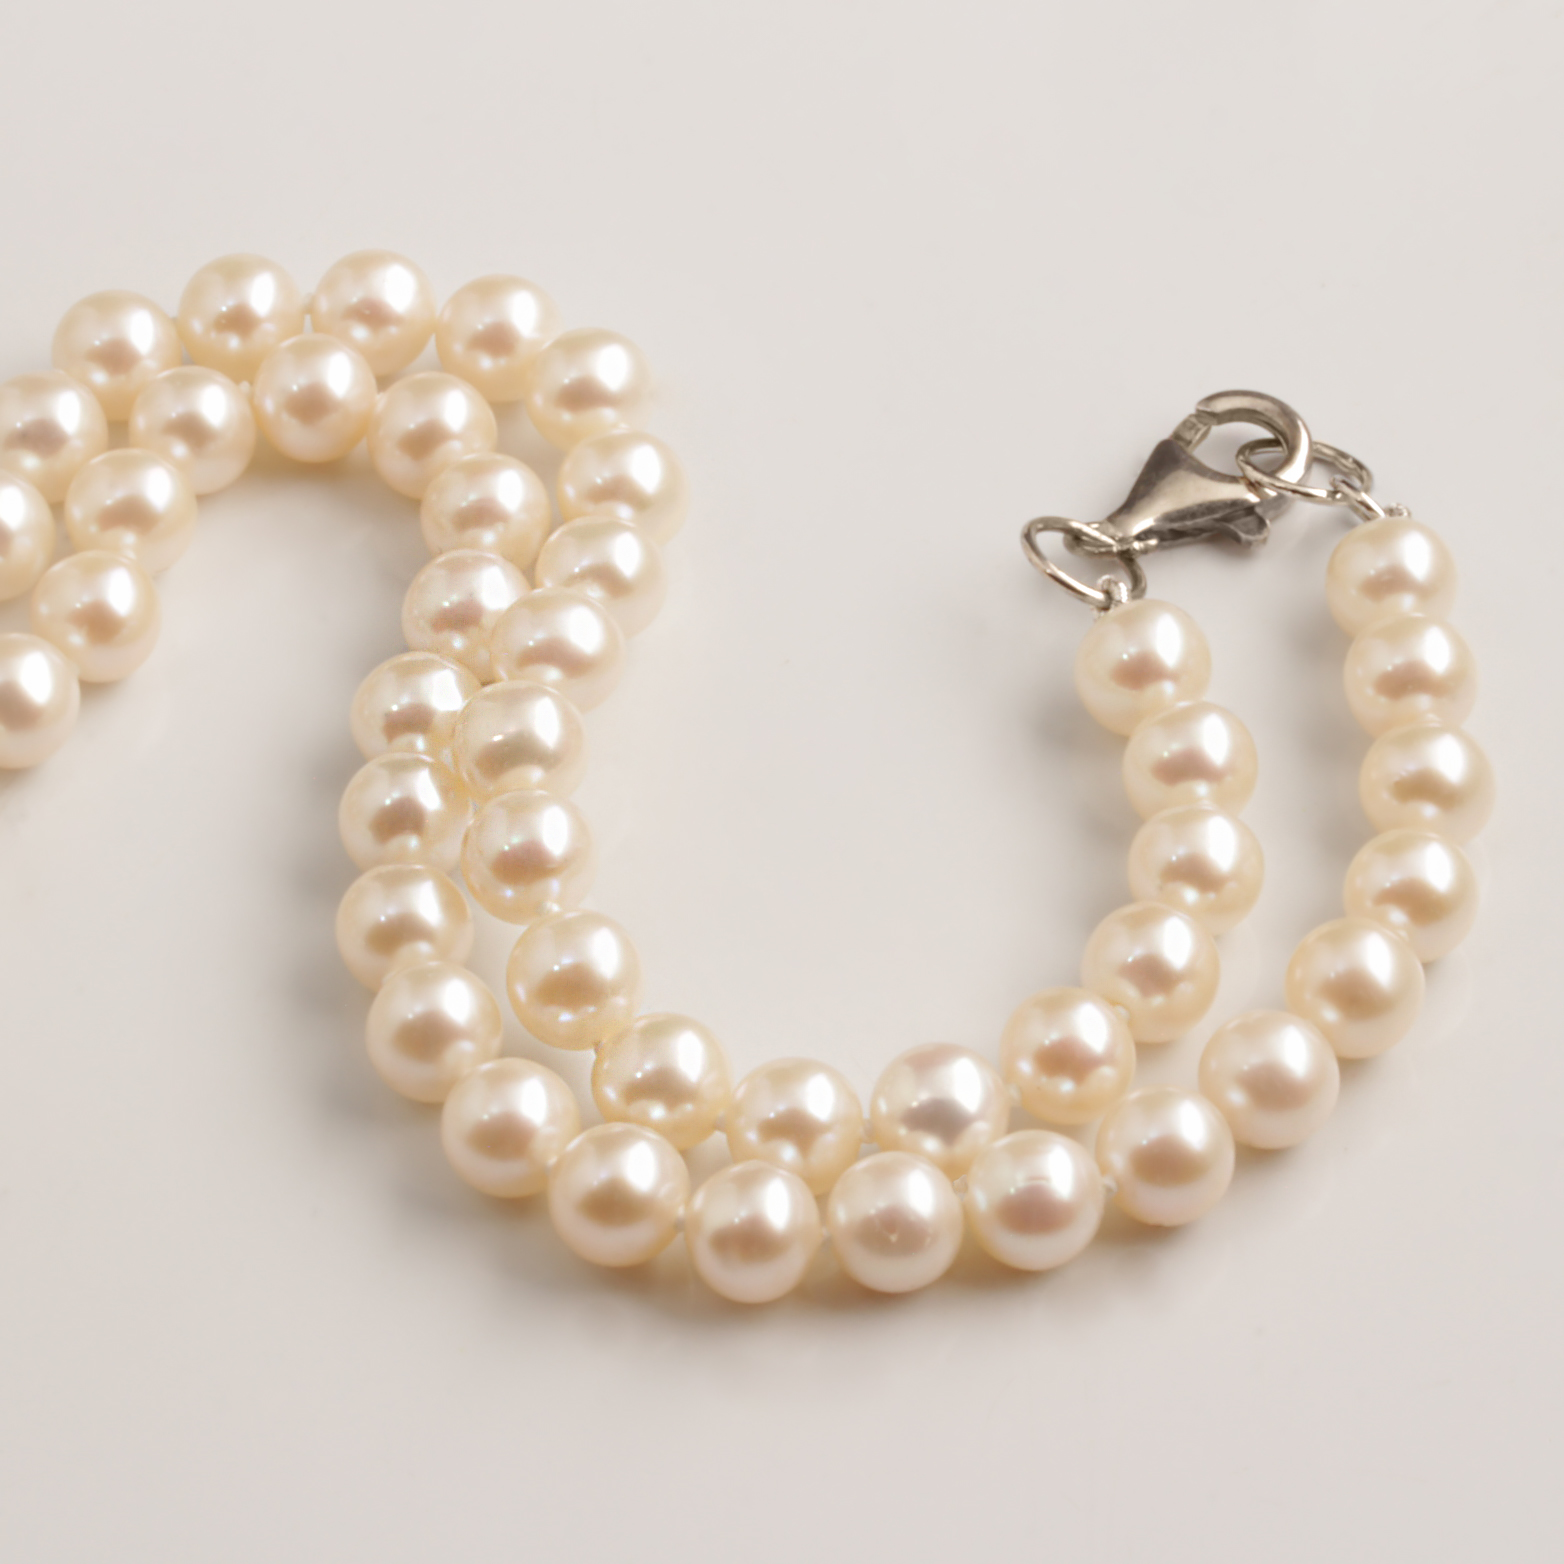 Fresh Water Pearl Bracelet & Necklace Set. 7" bracelet and 18" necklace, both w/ silver clasp. #12428